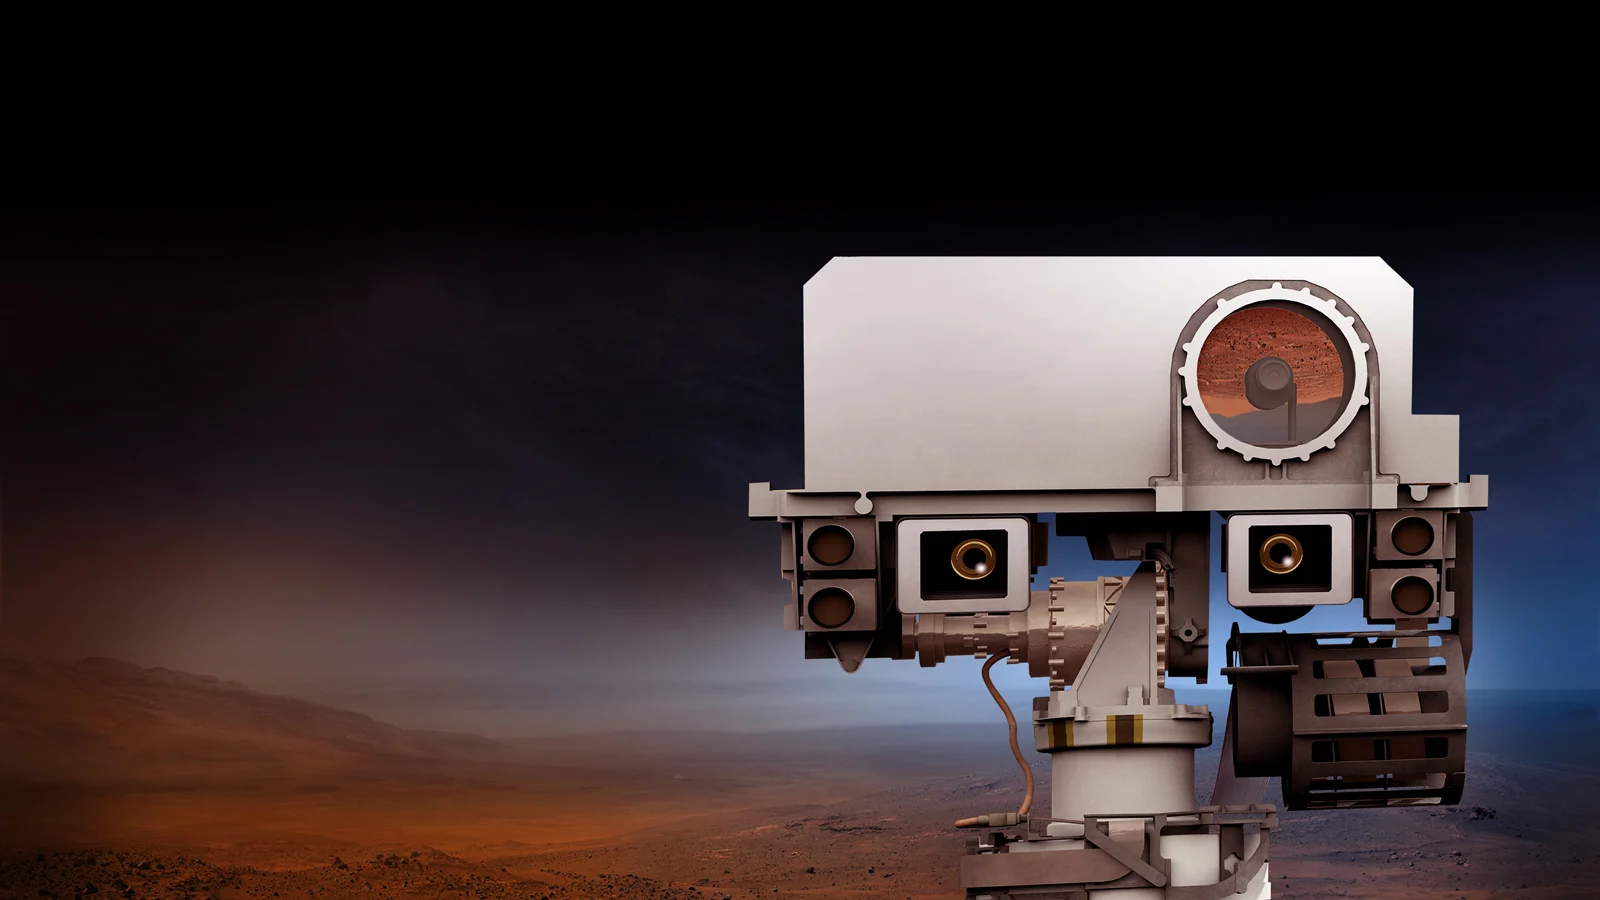 Say 'Hi' to Perseverance, the NASA rover that will search for ancient Mars life